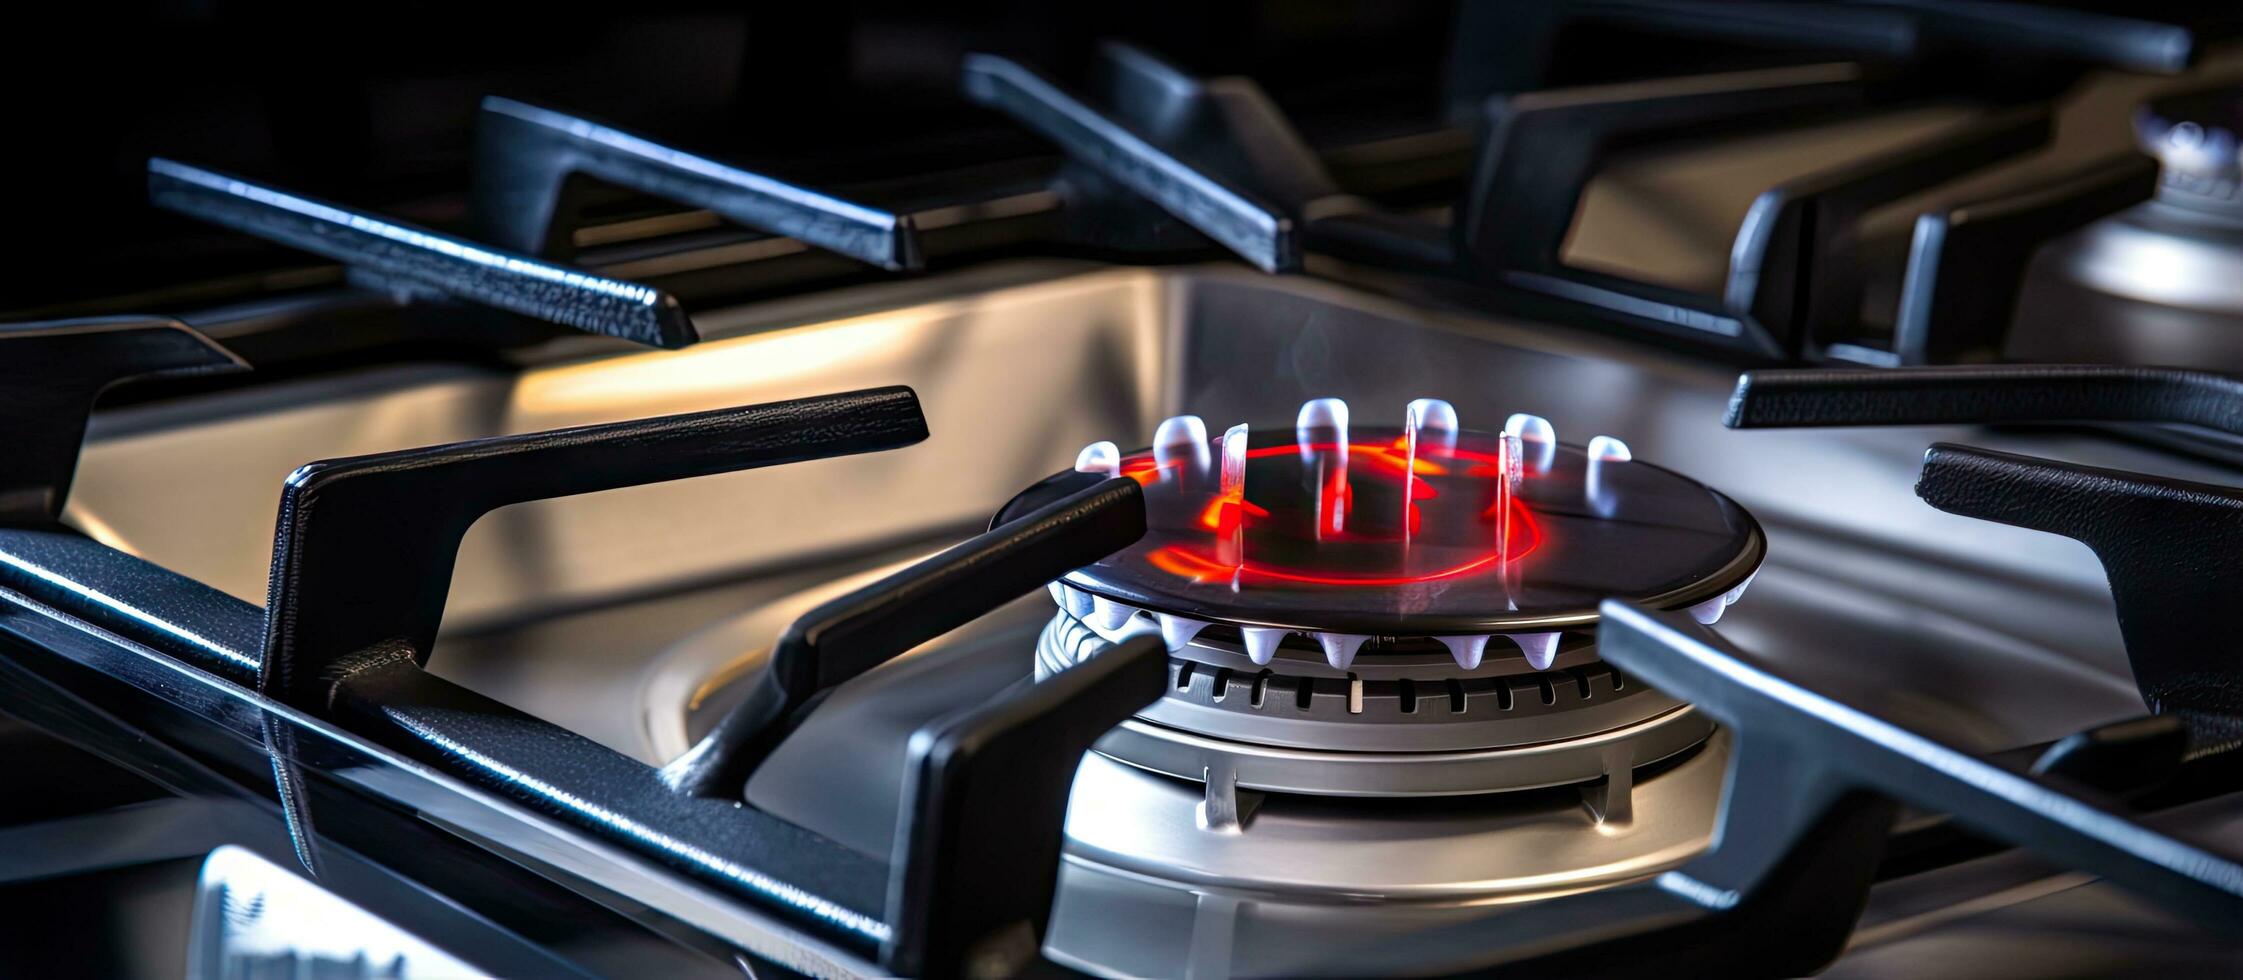 Well designed gas stove burner ideal for various uses Brazilian close up image from above selective focus photo